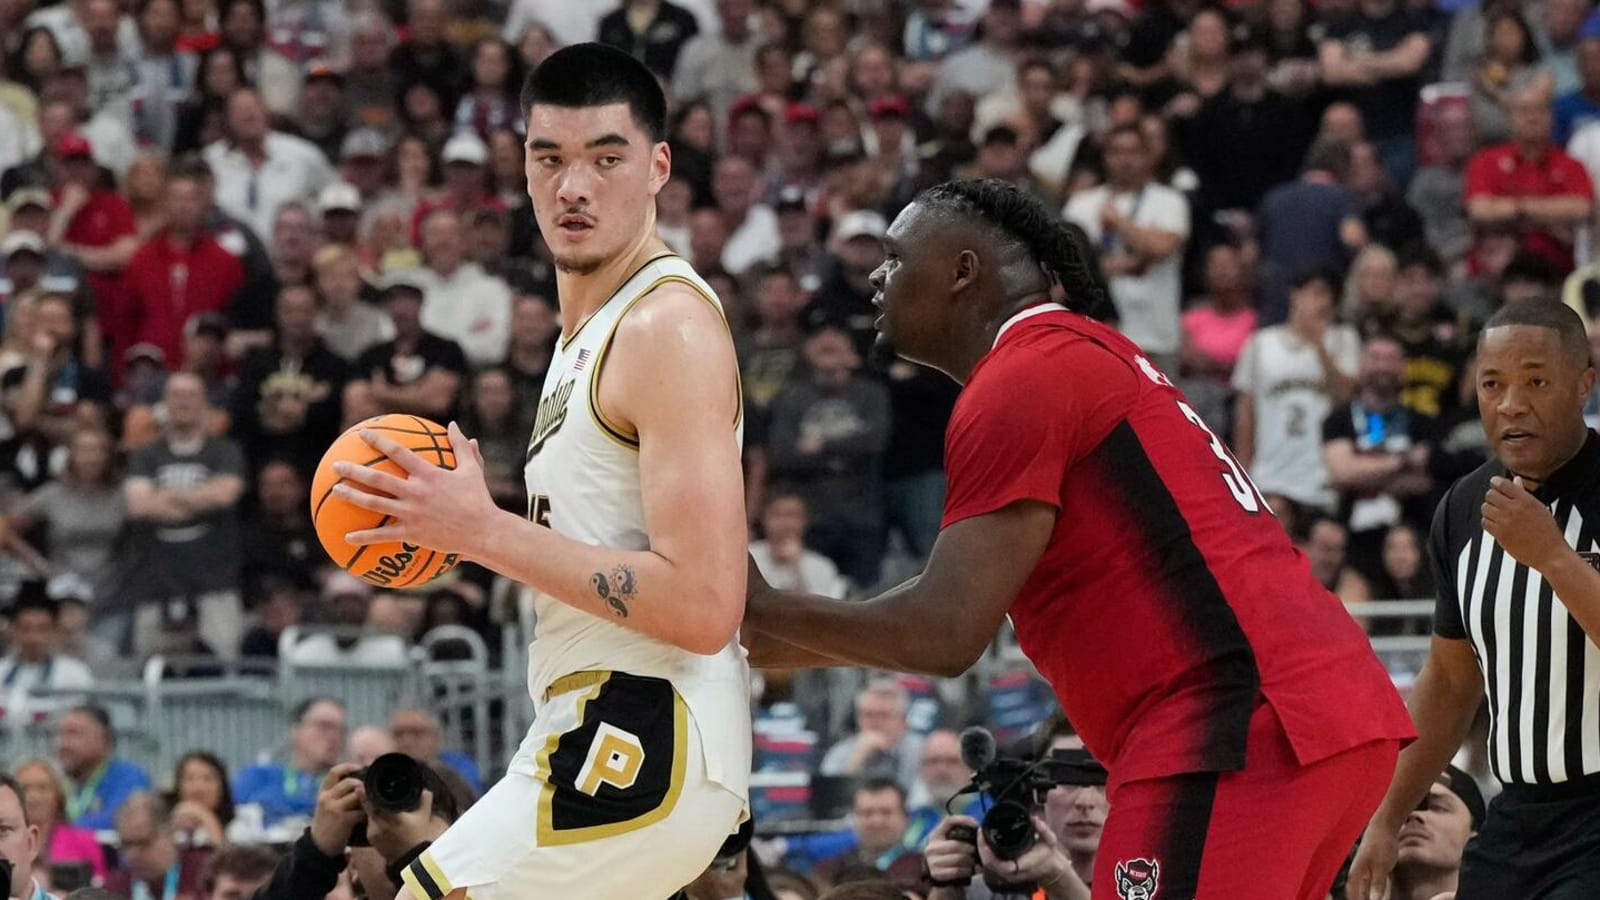 Purdue outlasts NC State, advances to NCAA title game